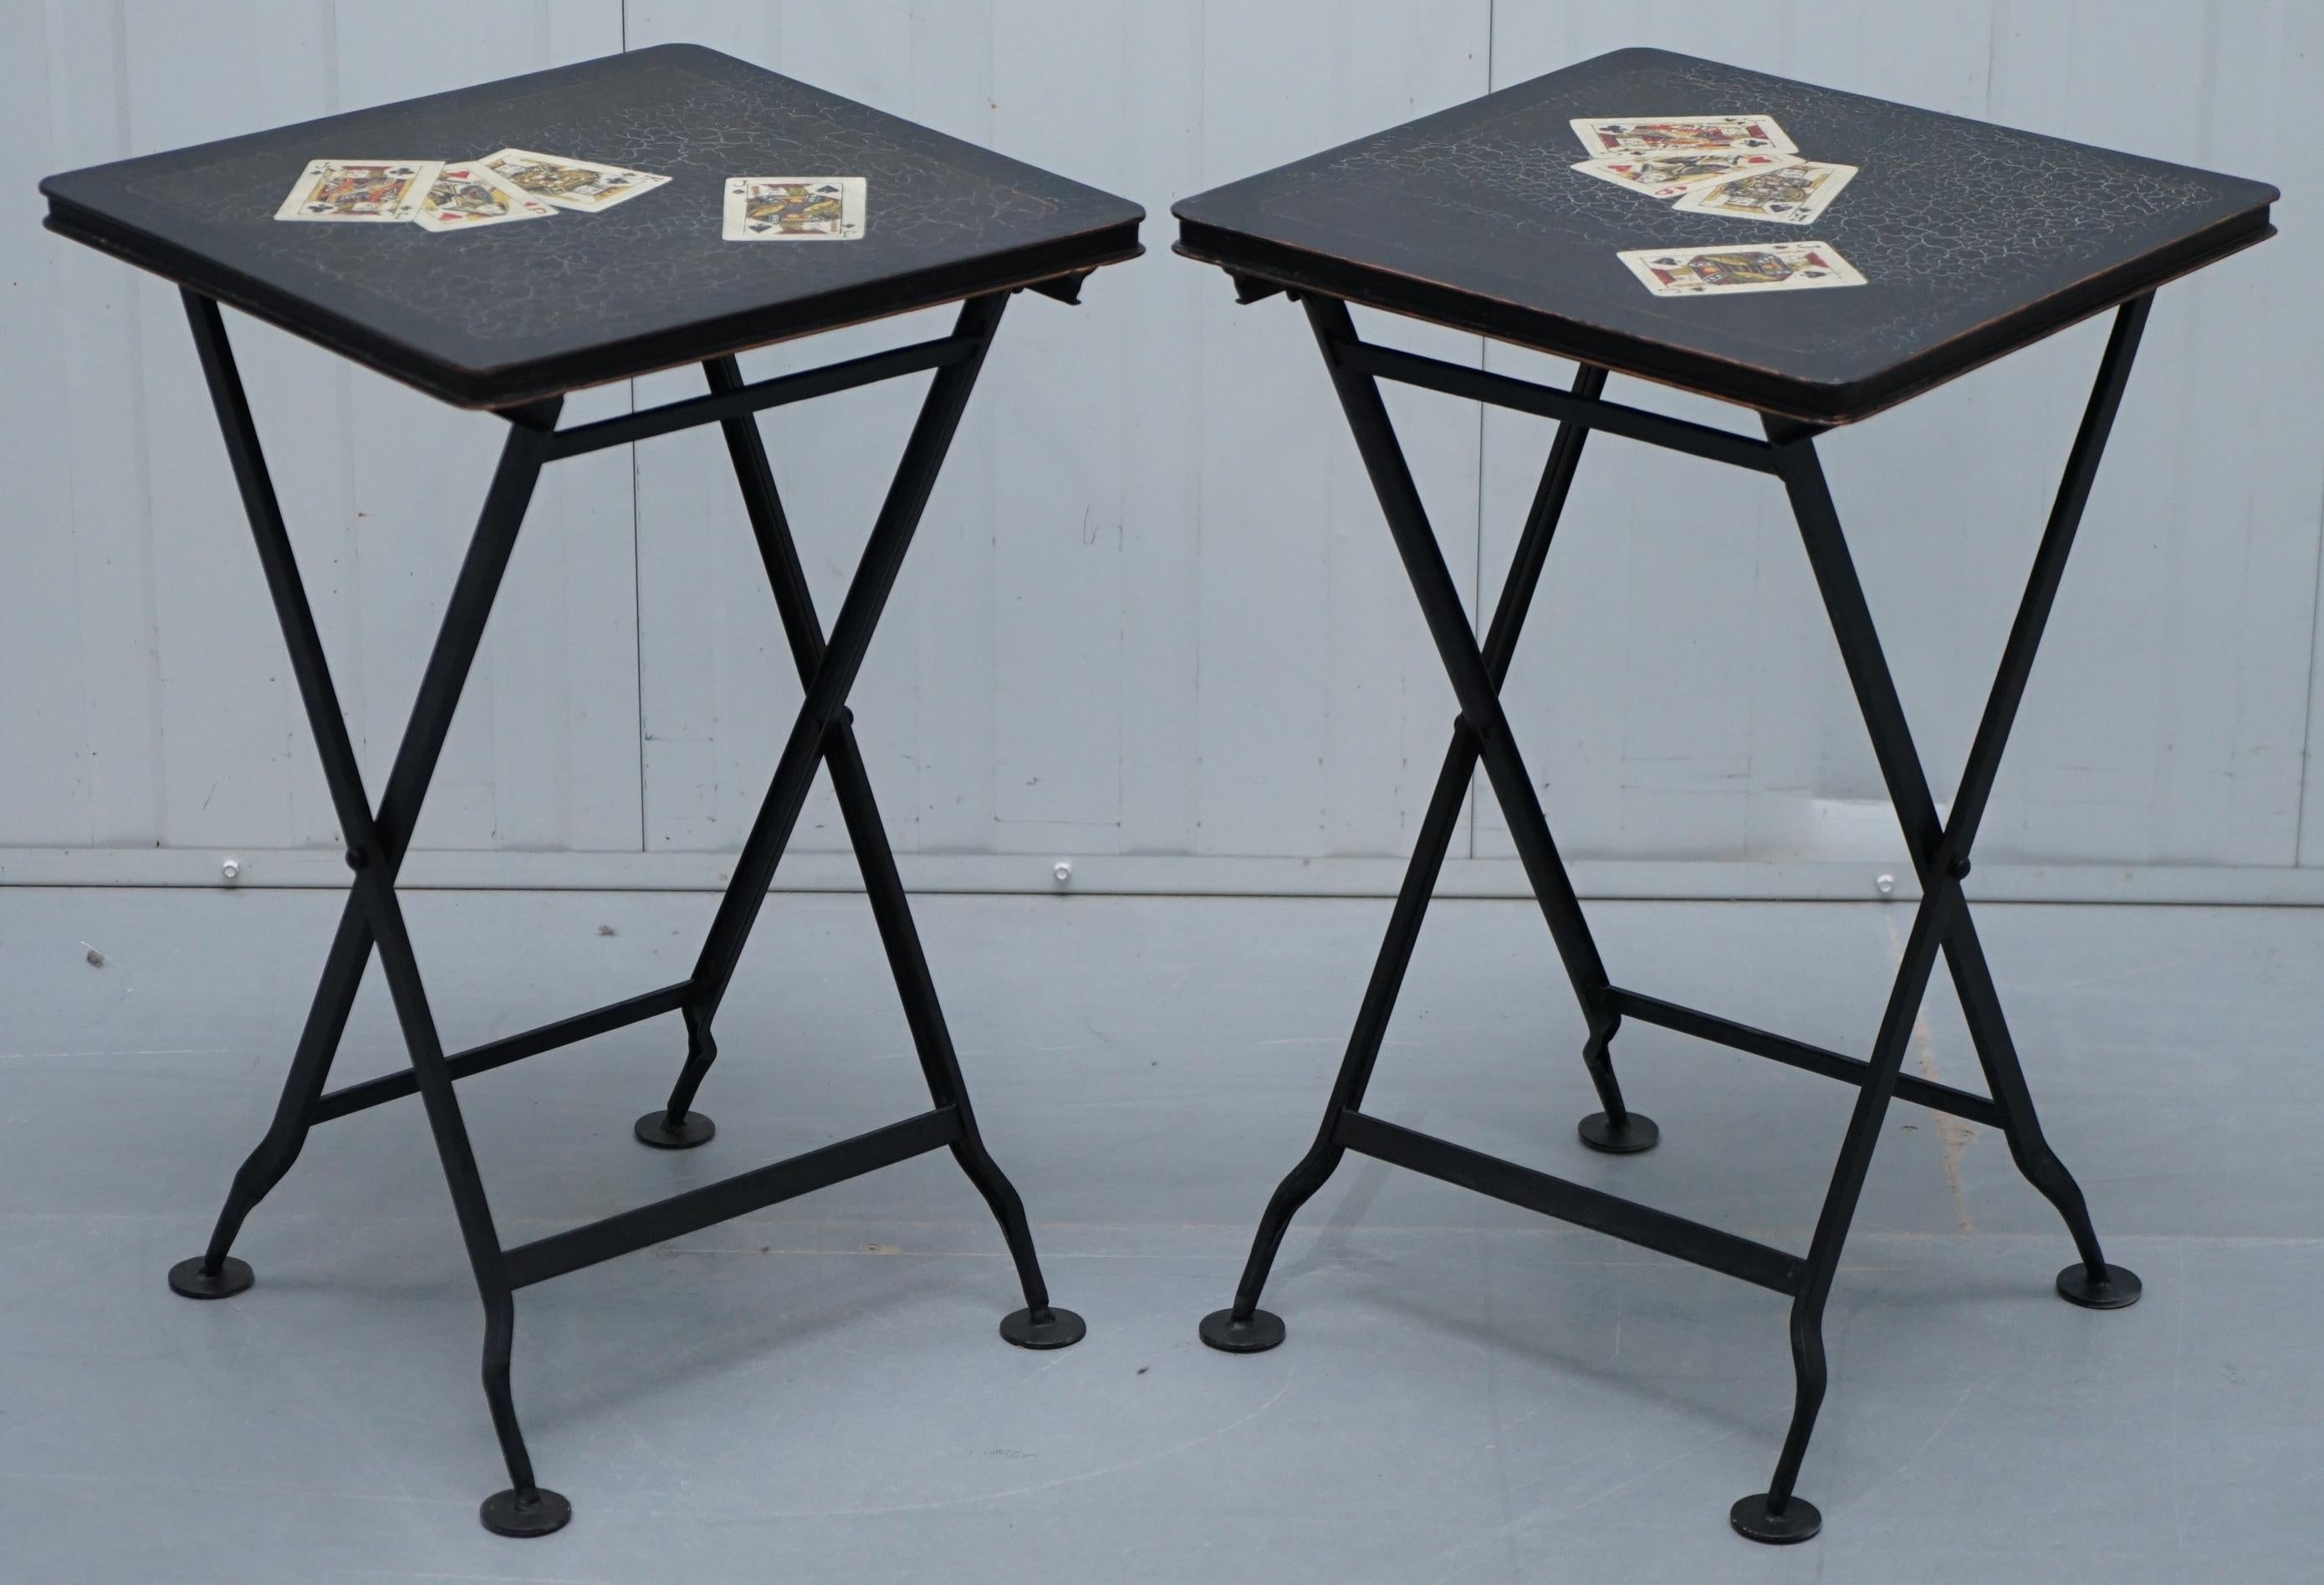 We are delighted to offer for sale this stunning pair of original vintage hand painted metal folding card games tables.

A very good looking and well pair, the paint has the distressed vintage finish you see on hundred year old original paint but